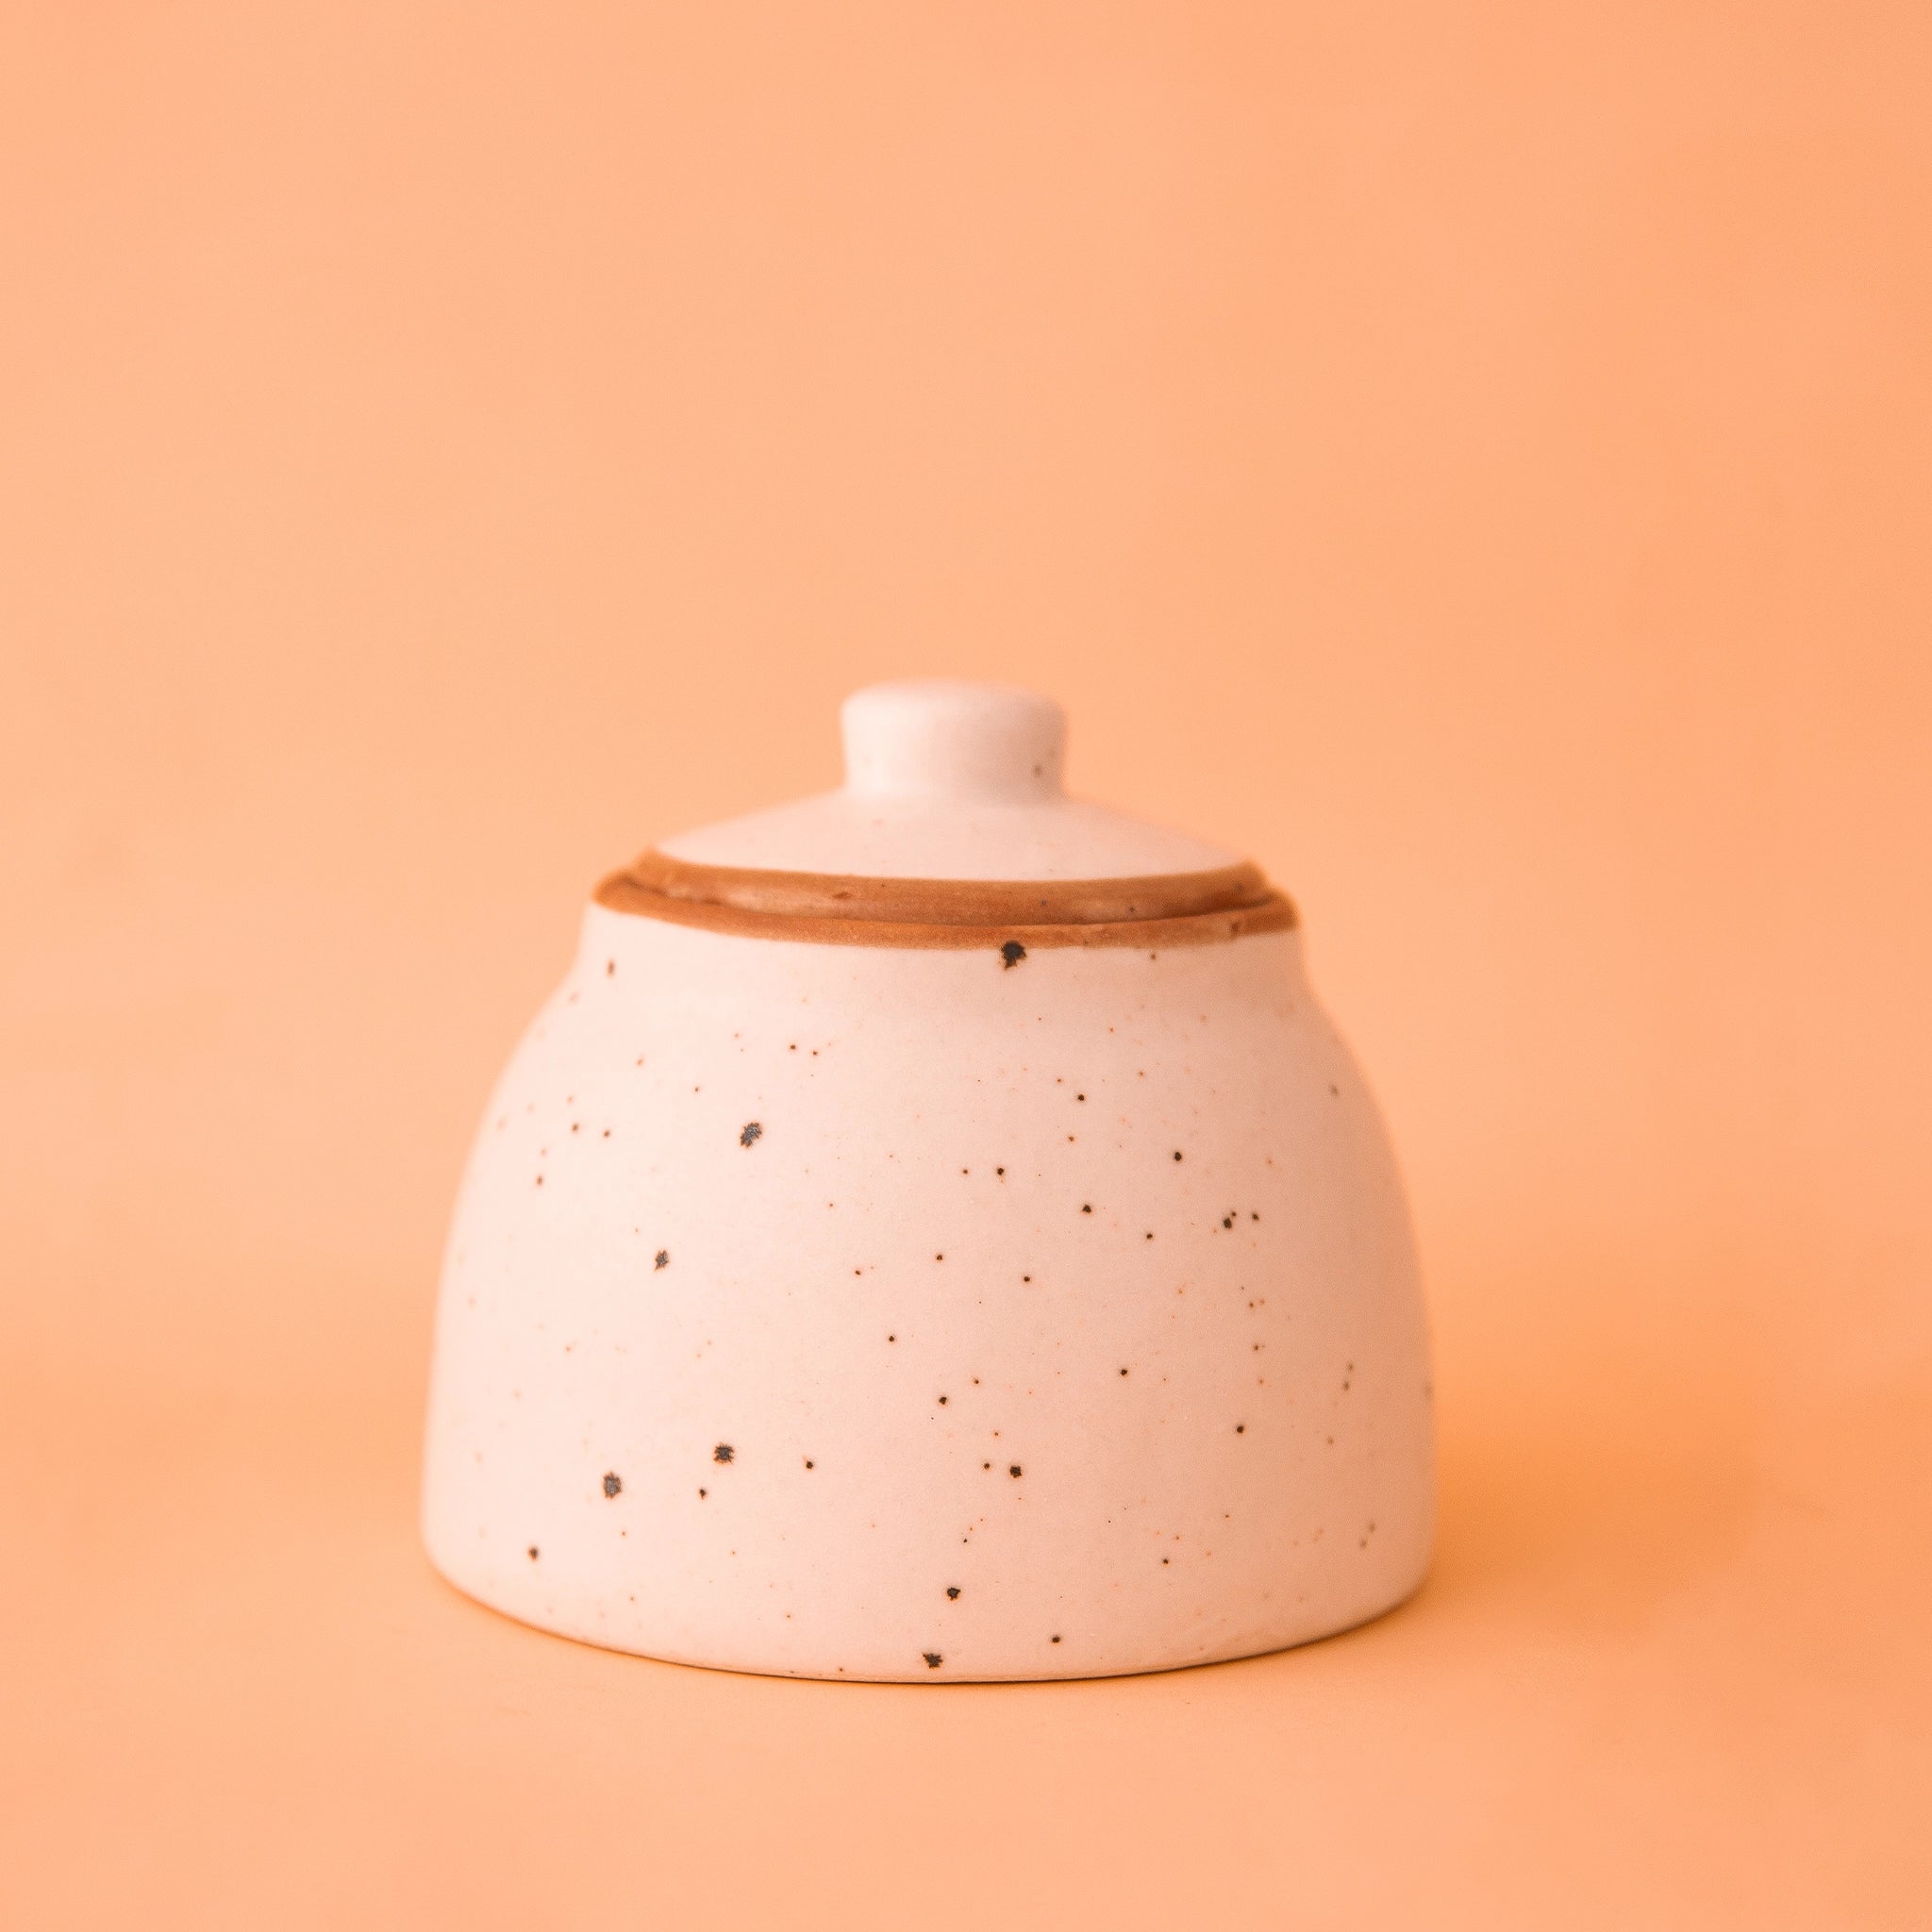 On a peachy background is a neutral stoneware sugar jar with a speckle texture.